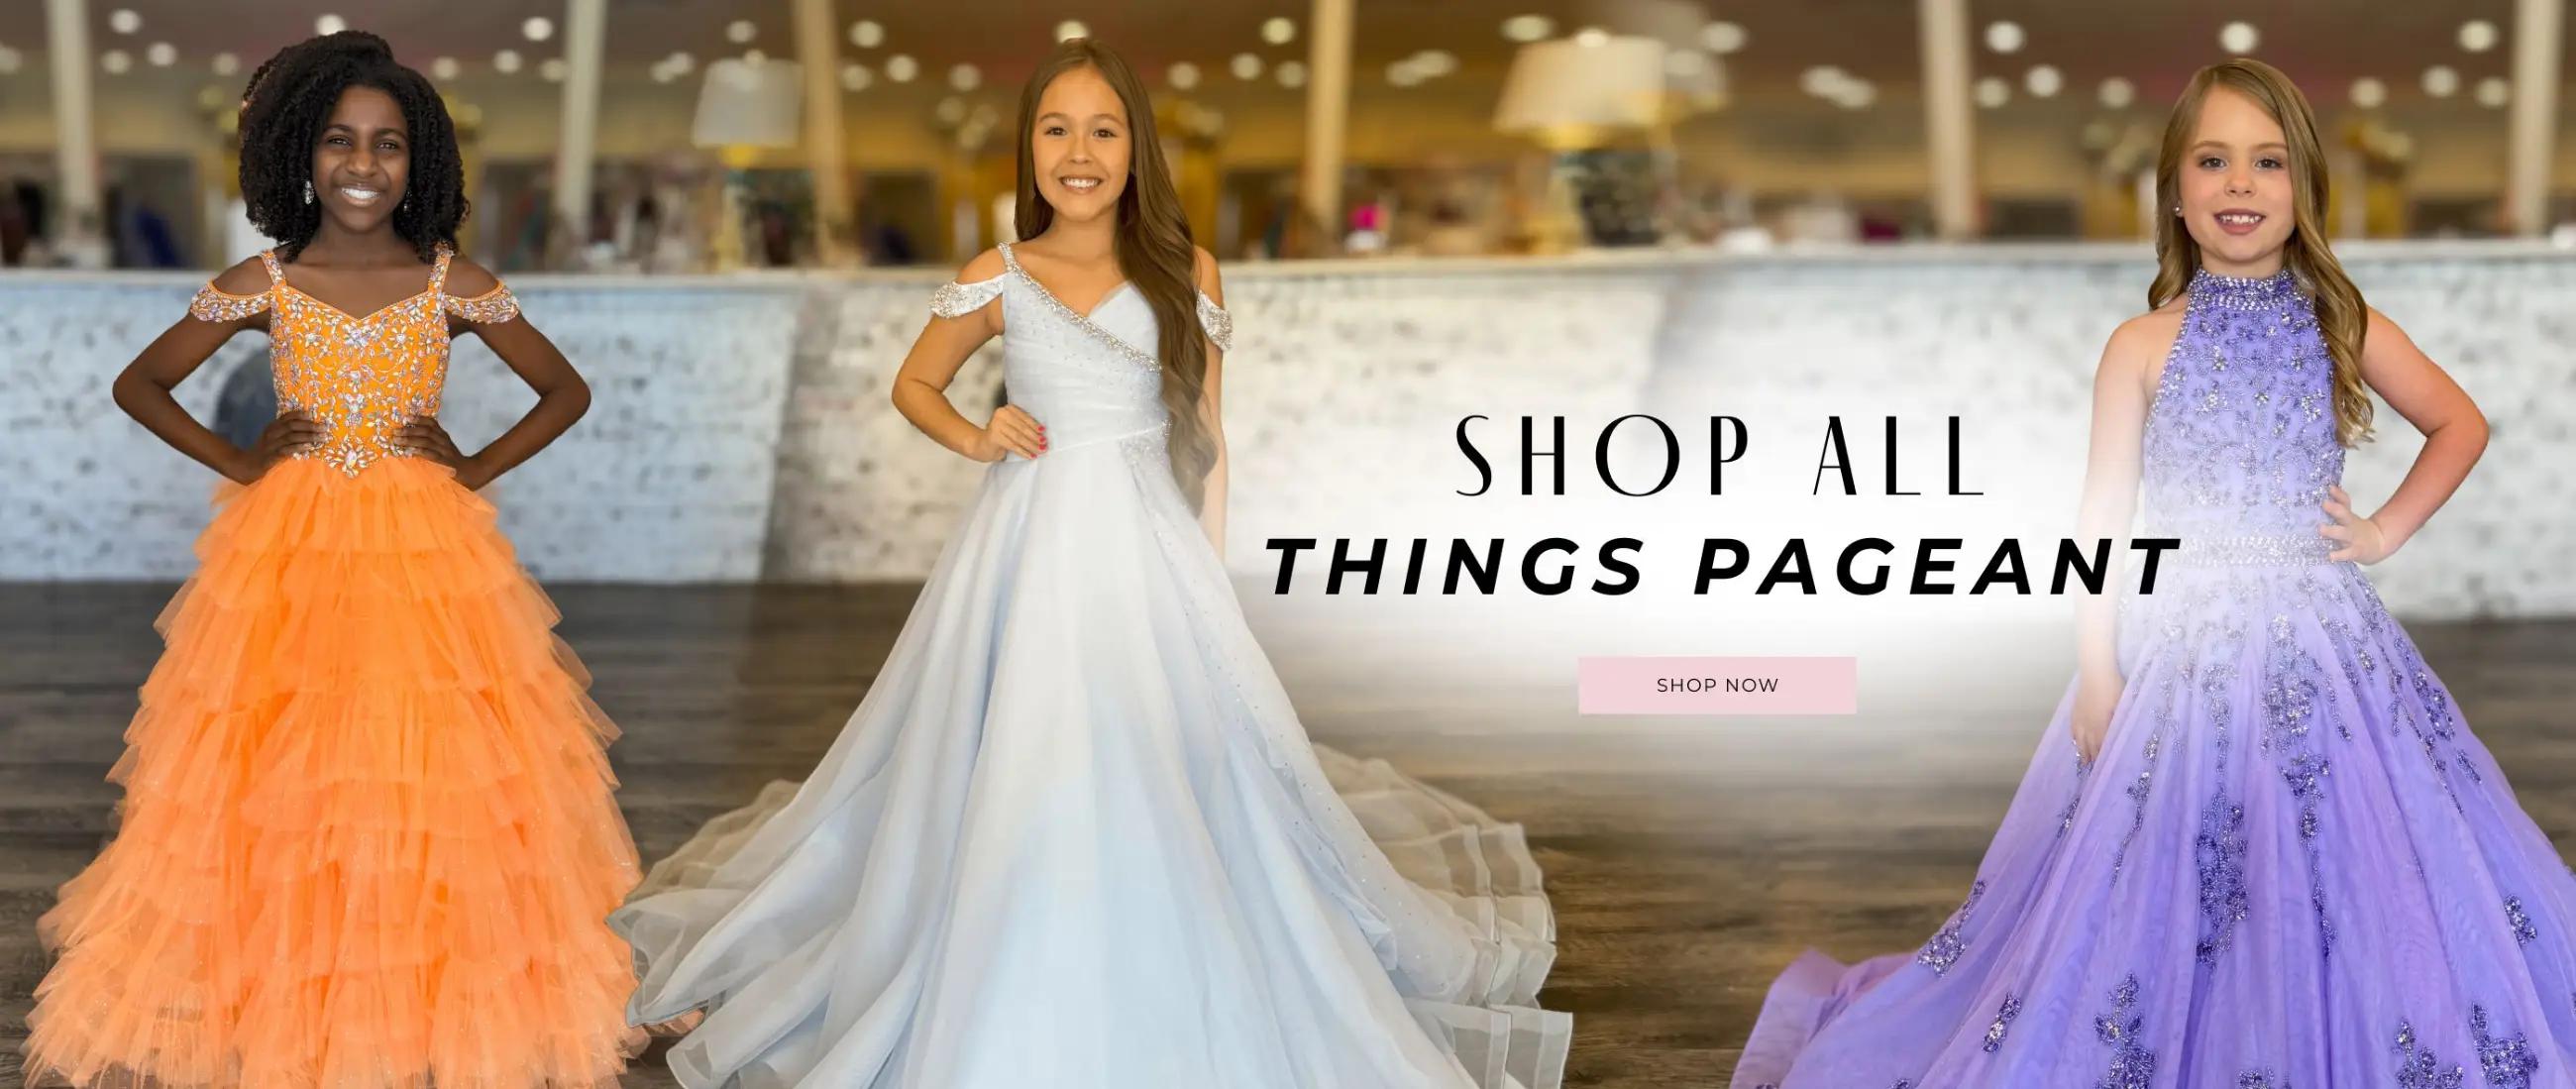 Desktop New Shop All Things Pageant Banner